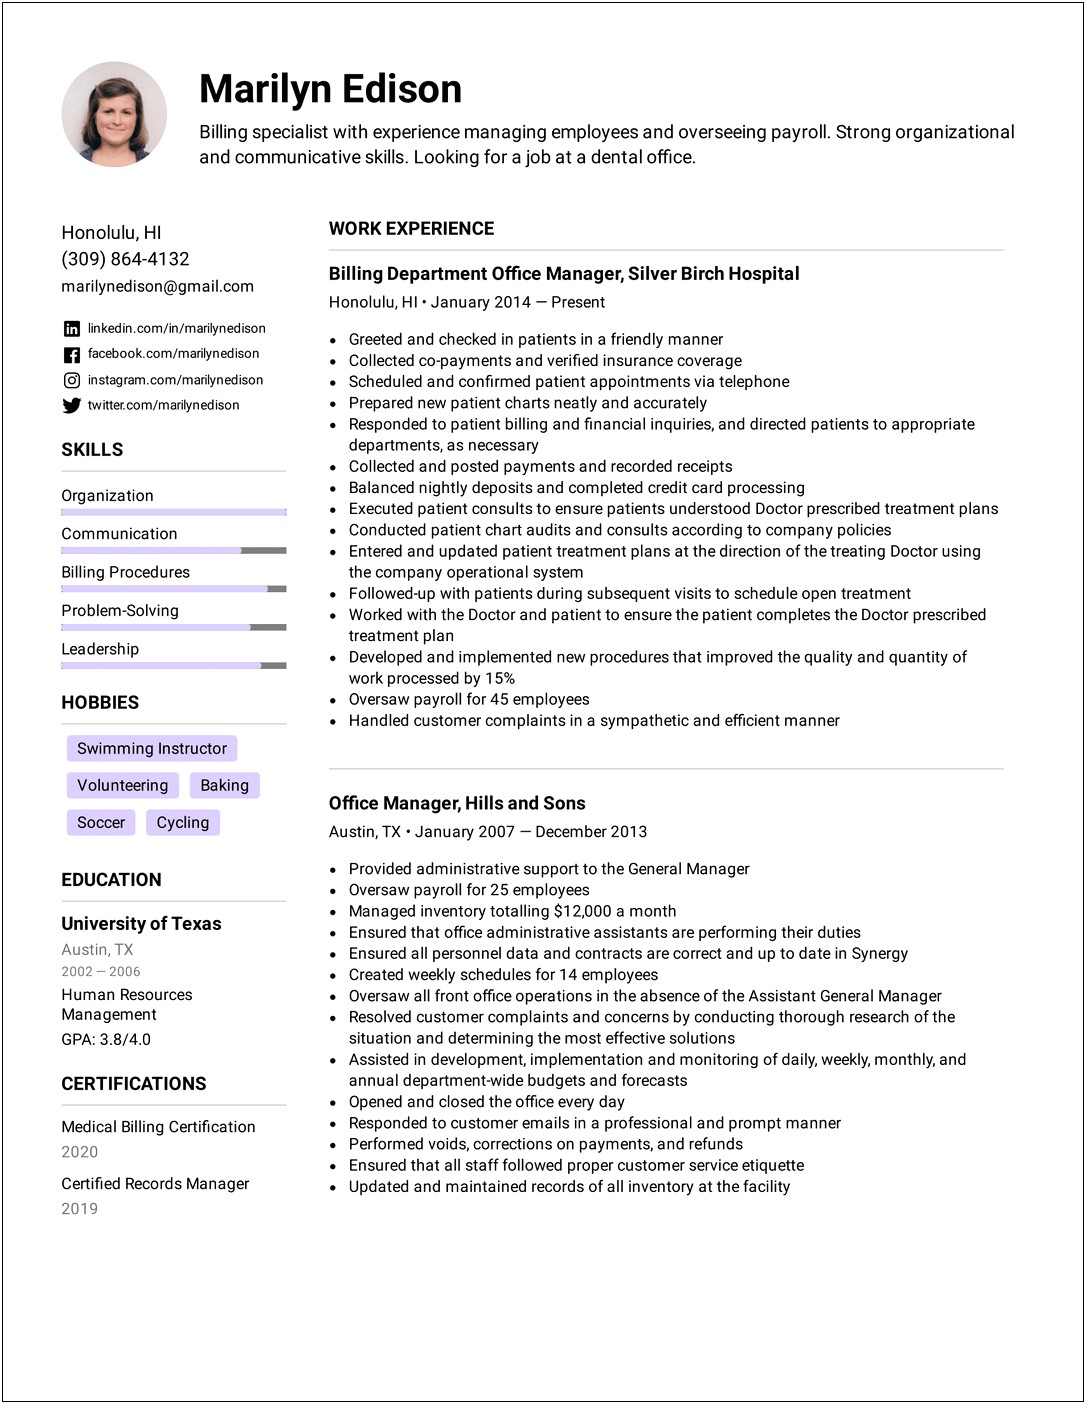 Resume Formats That Work In 2019